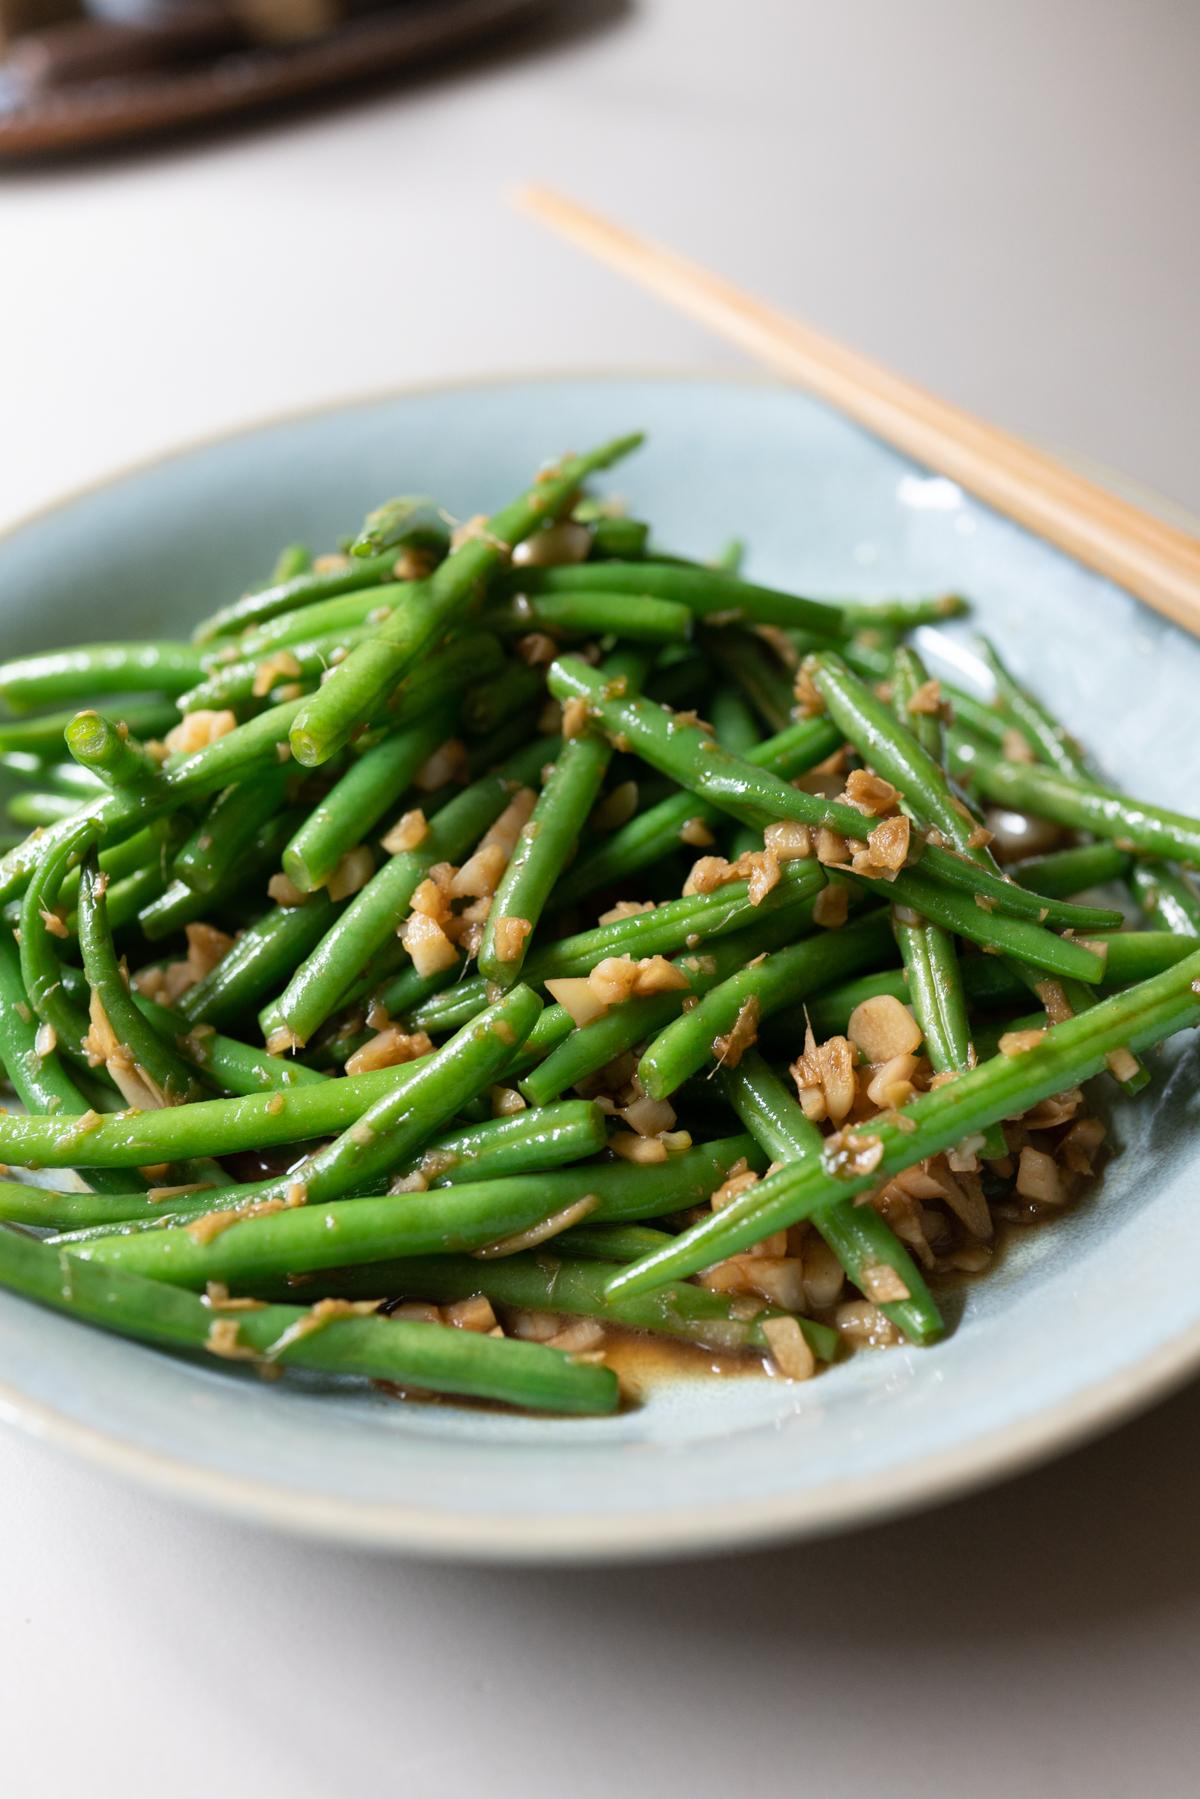 Garlic ginger green beans, plated and ready to eat